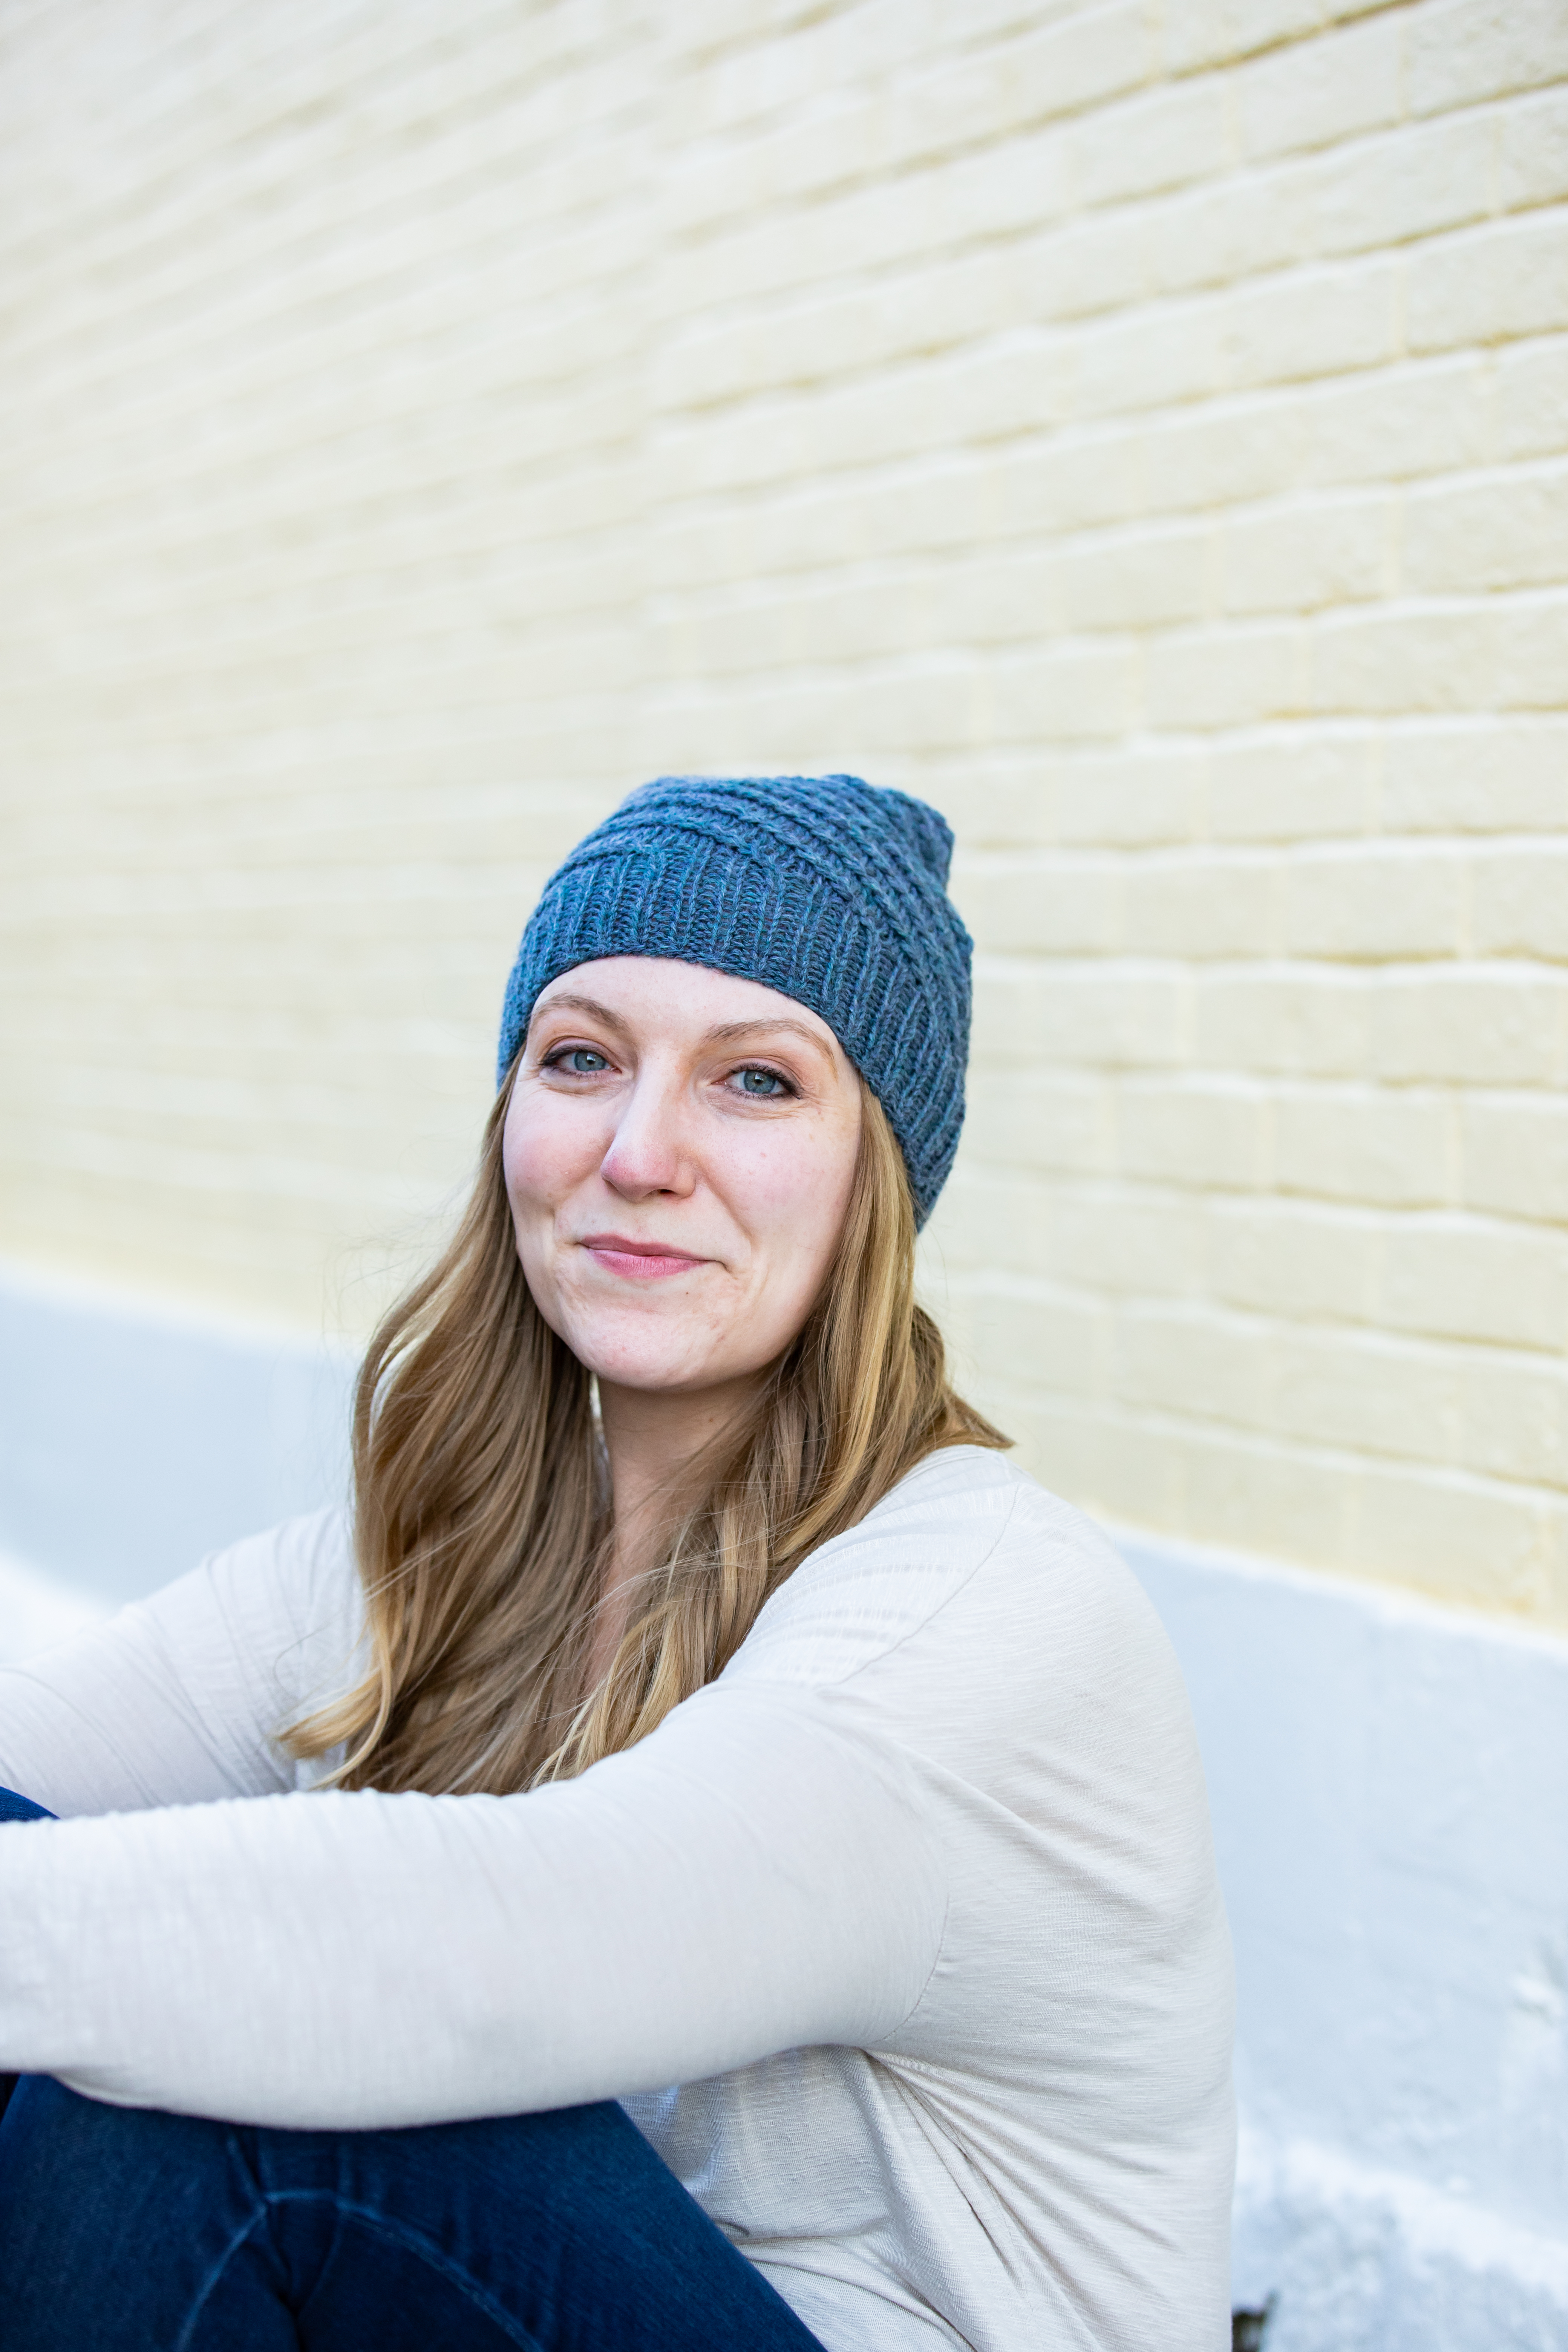 Introducing The Sweetwater Beanie